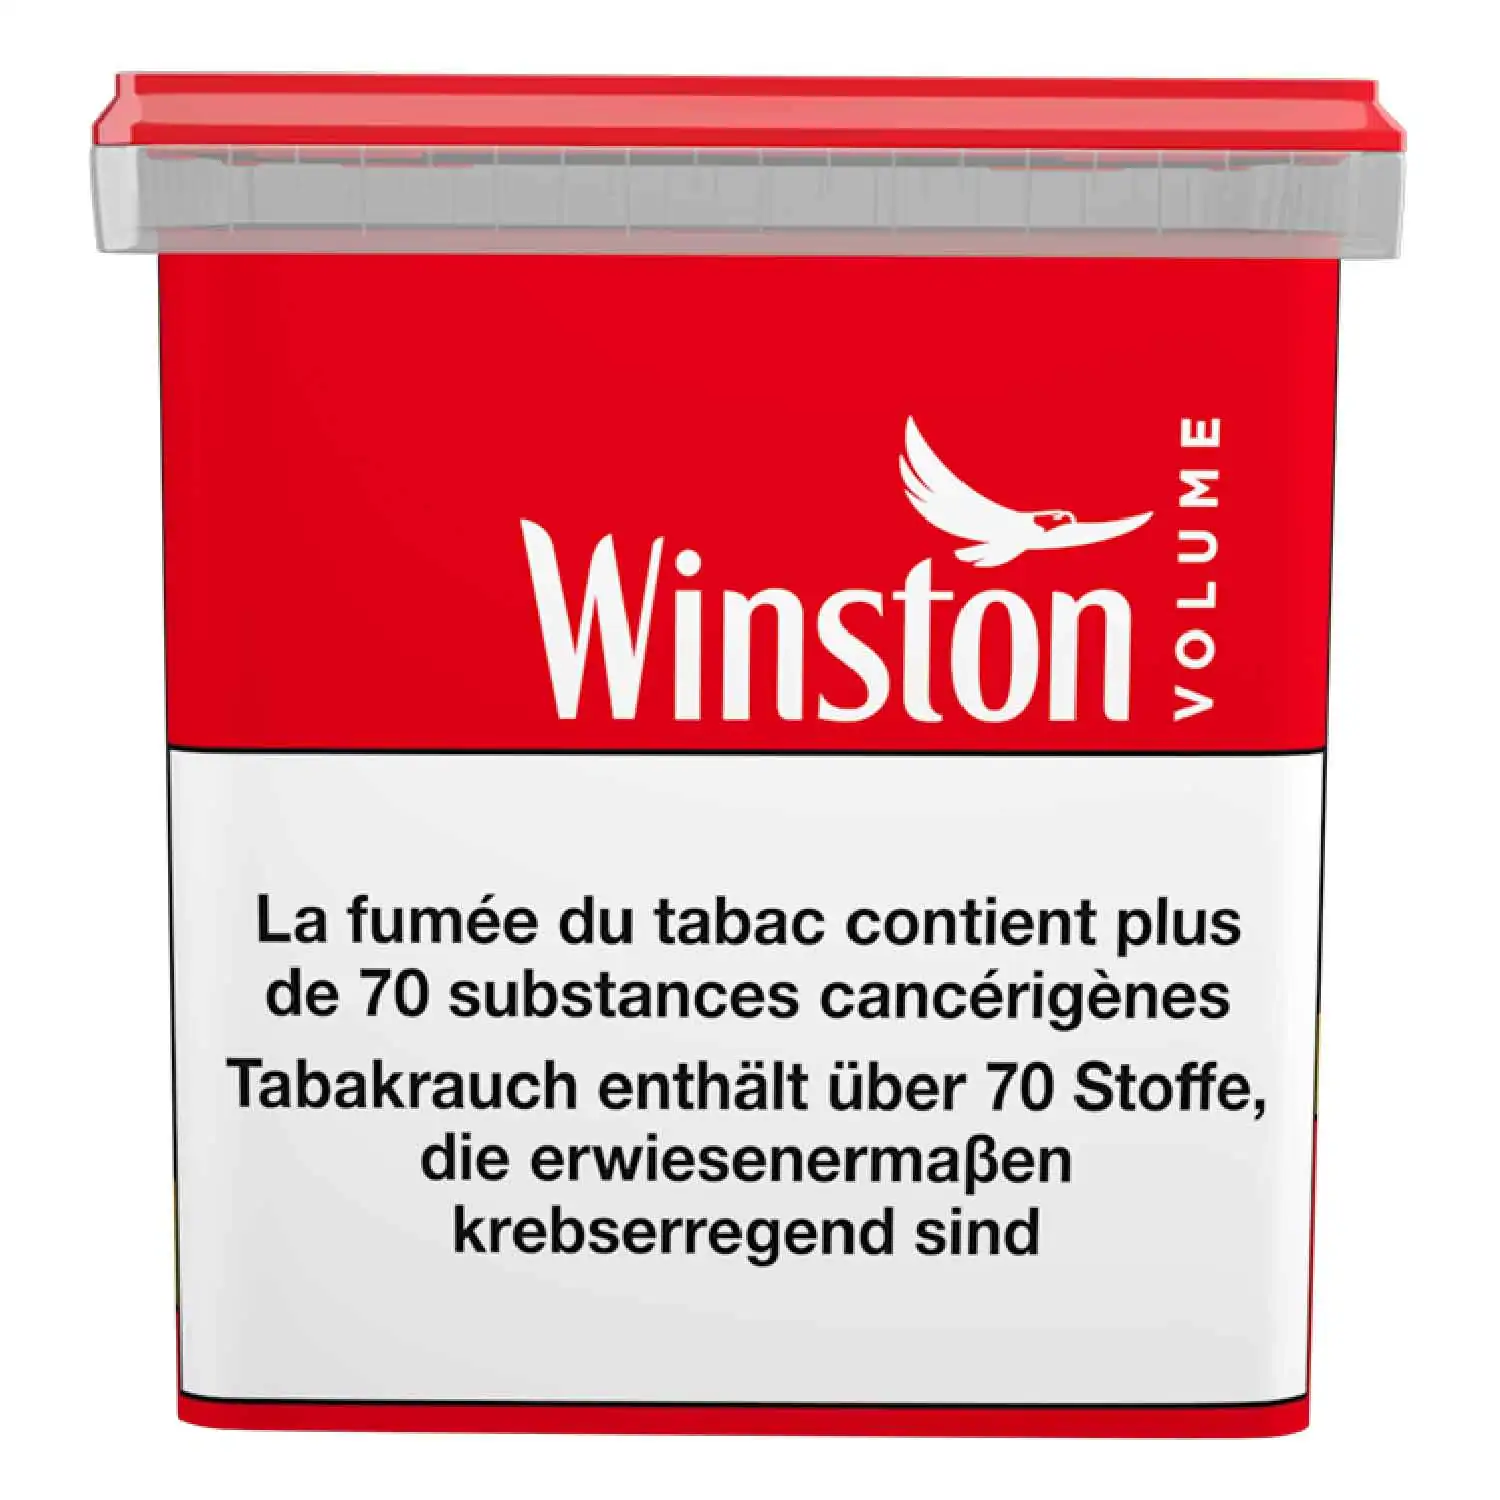 Winston volume red 500g - Buy at Real Tobacco